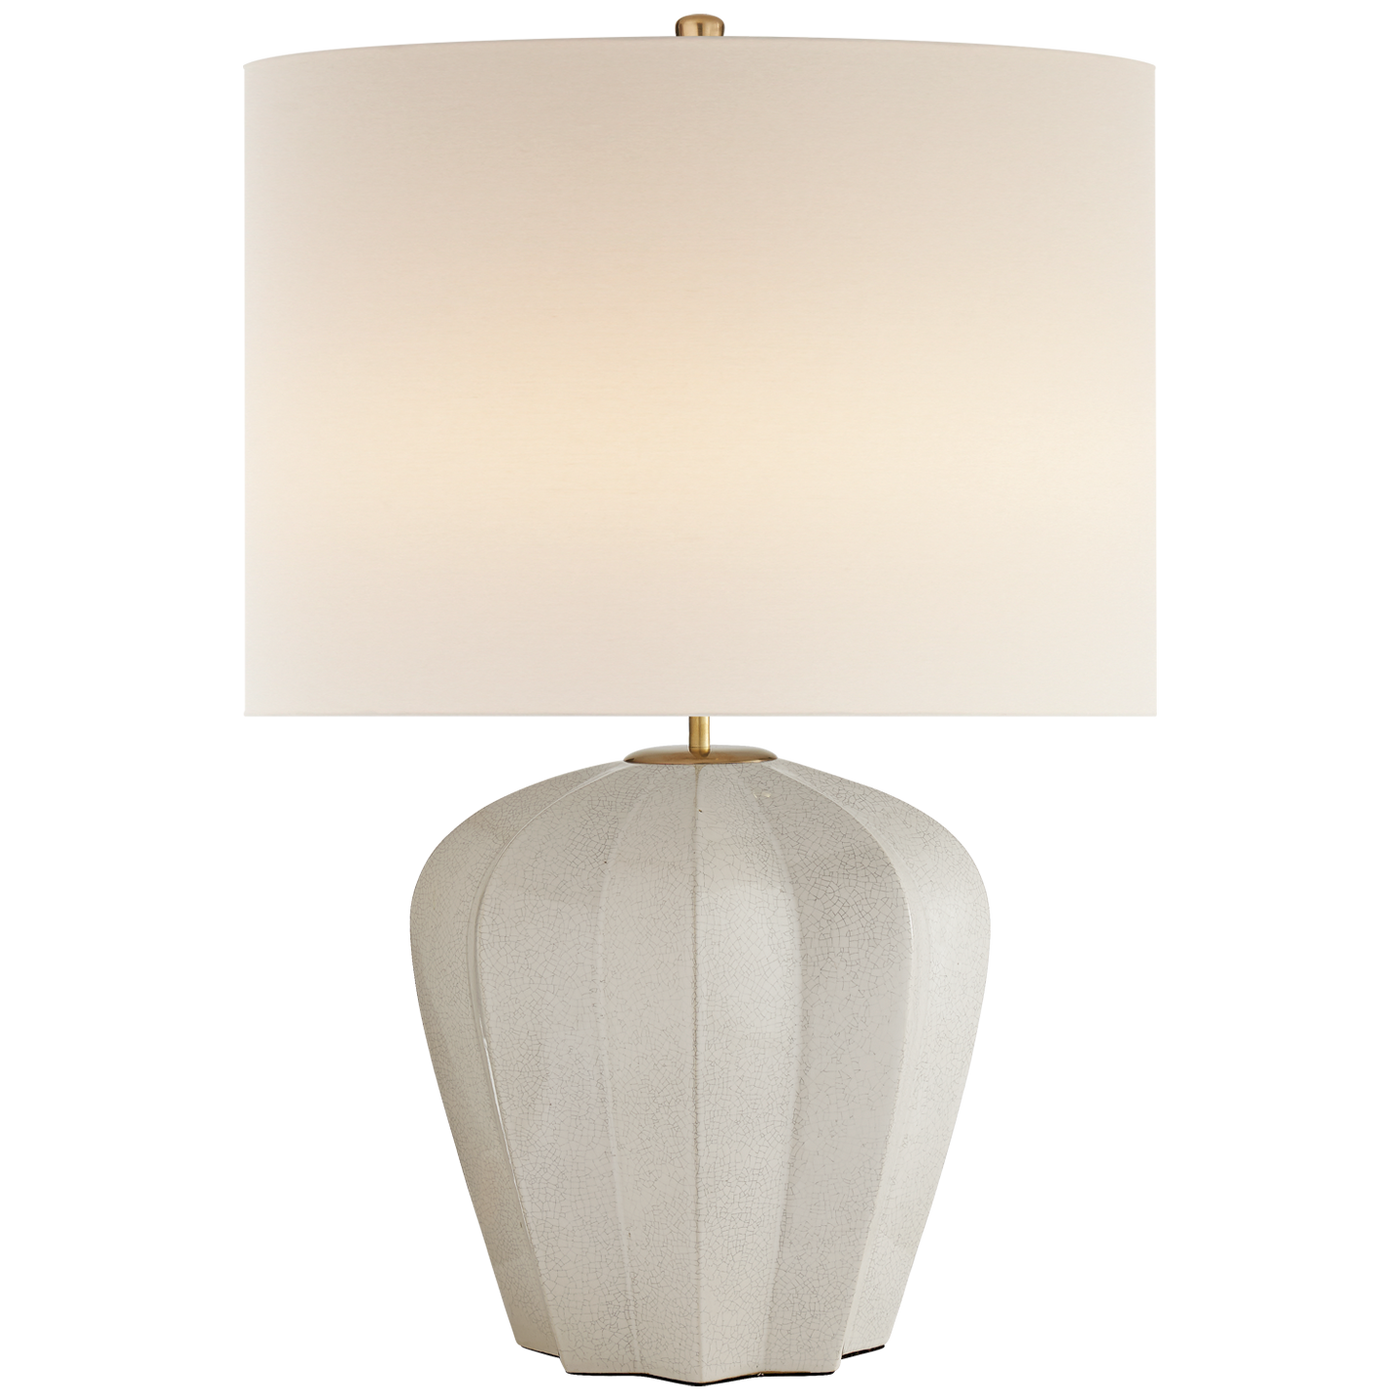 TABLE LAMP SCALLOPED BASE MEDIUM (Available in 2 Finishes)